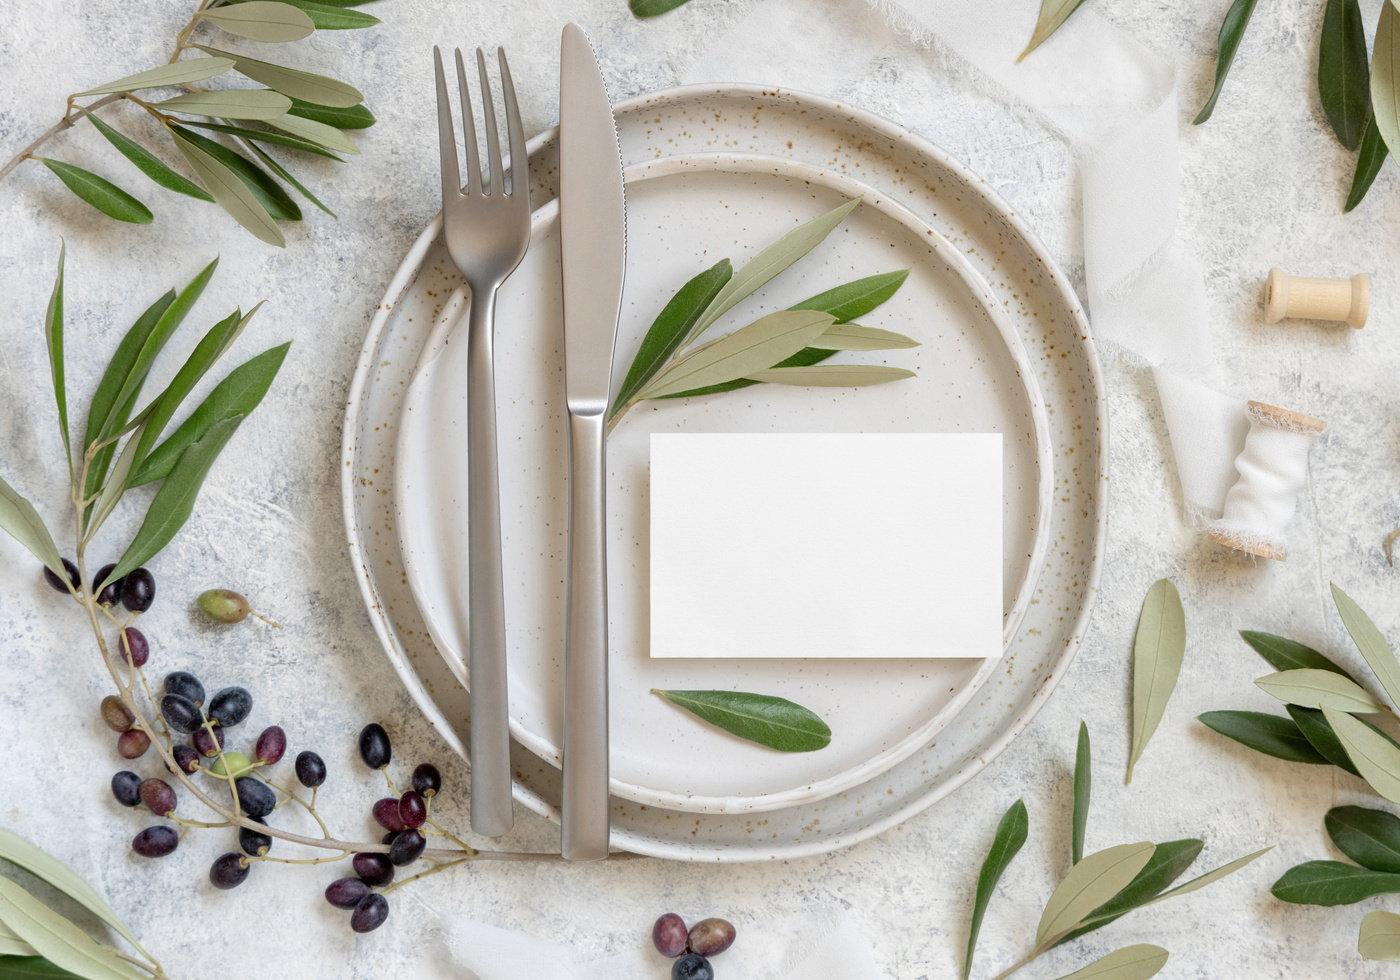 Wedding Table Setting Decorated with Olive Branches